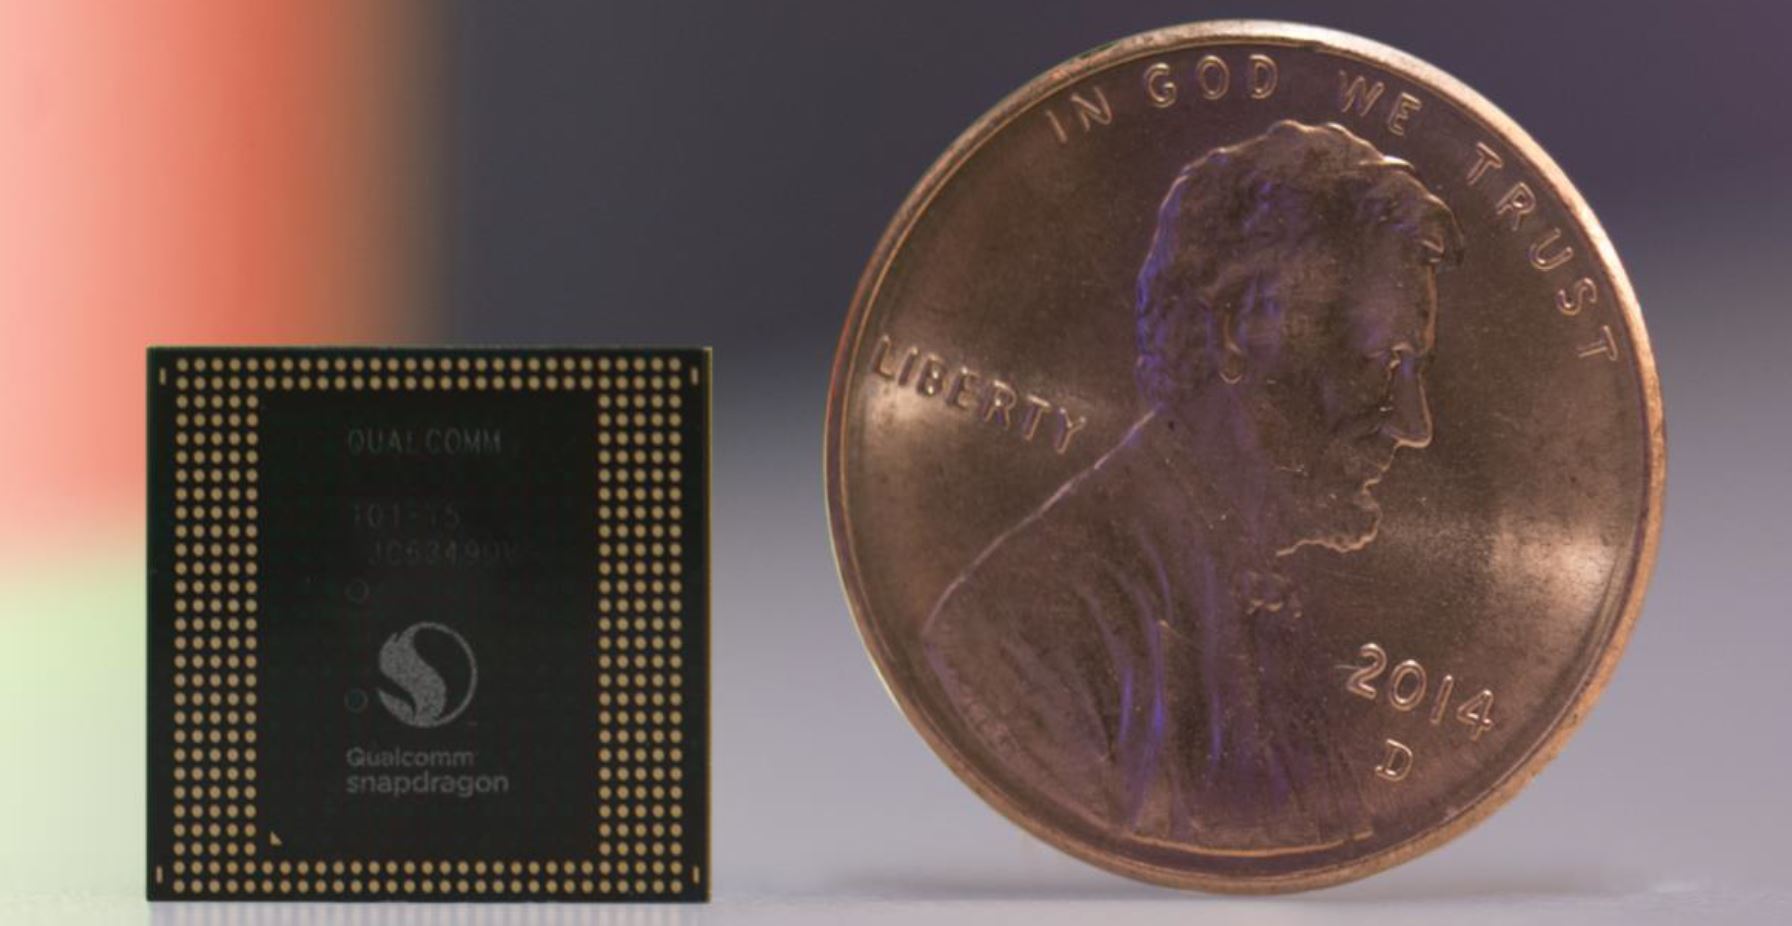 Qualcomm Snapdragon 835 coin